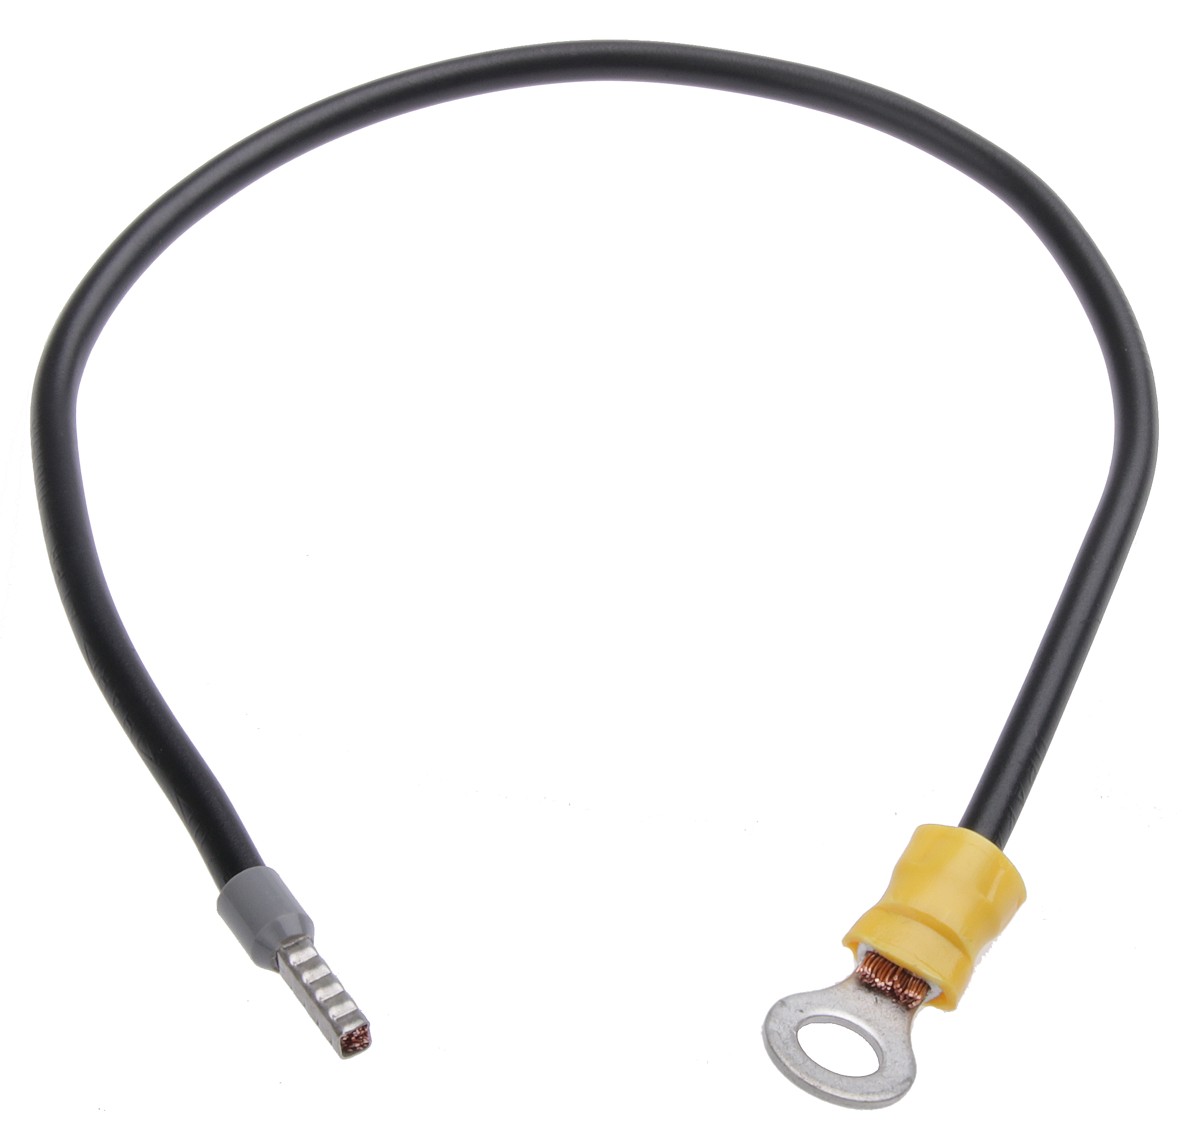 DC-DC cable between battery and power source, 60cm, M8 hole - wire end